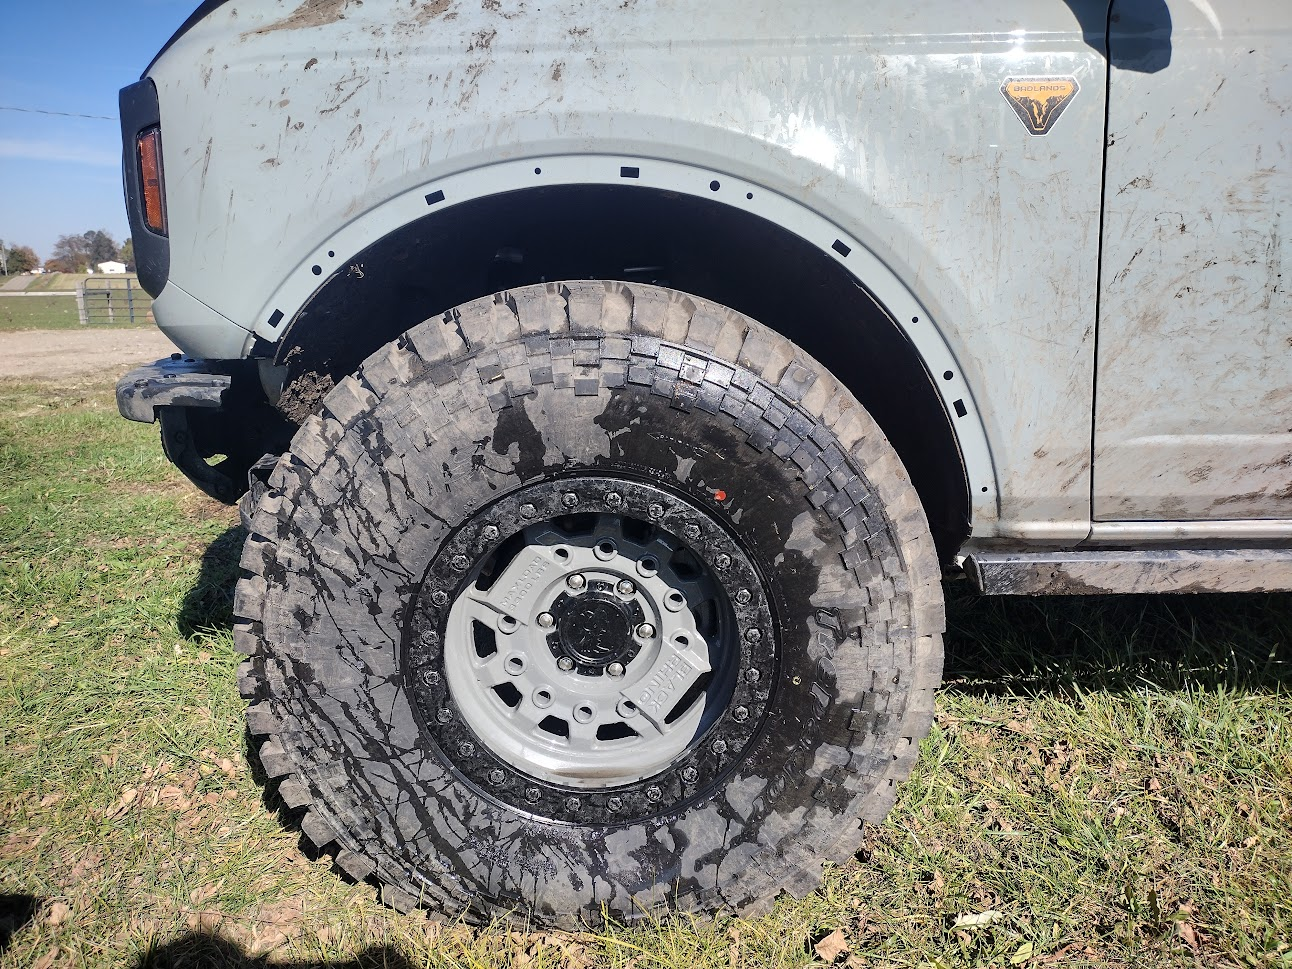 Ford Bronco 37" Tires on a Non-Sasquatch Badlands - My Experience, Results, Pics 1666477730465